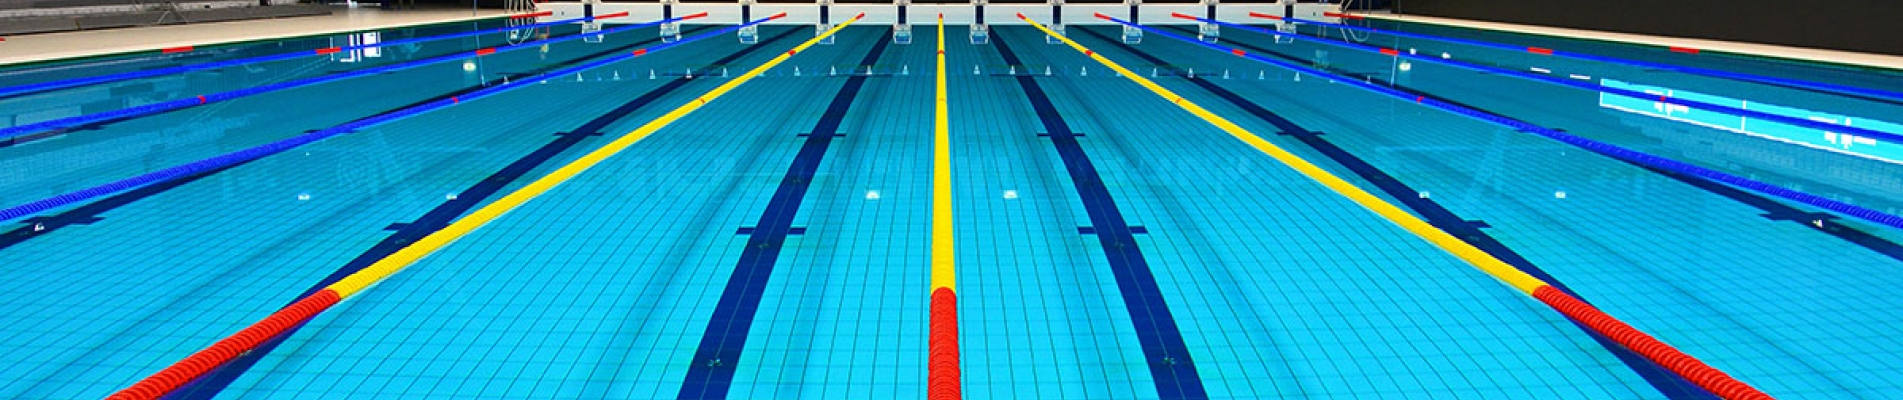 How to Build Olympic Swimming Pool?